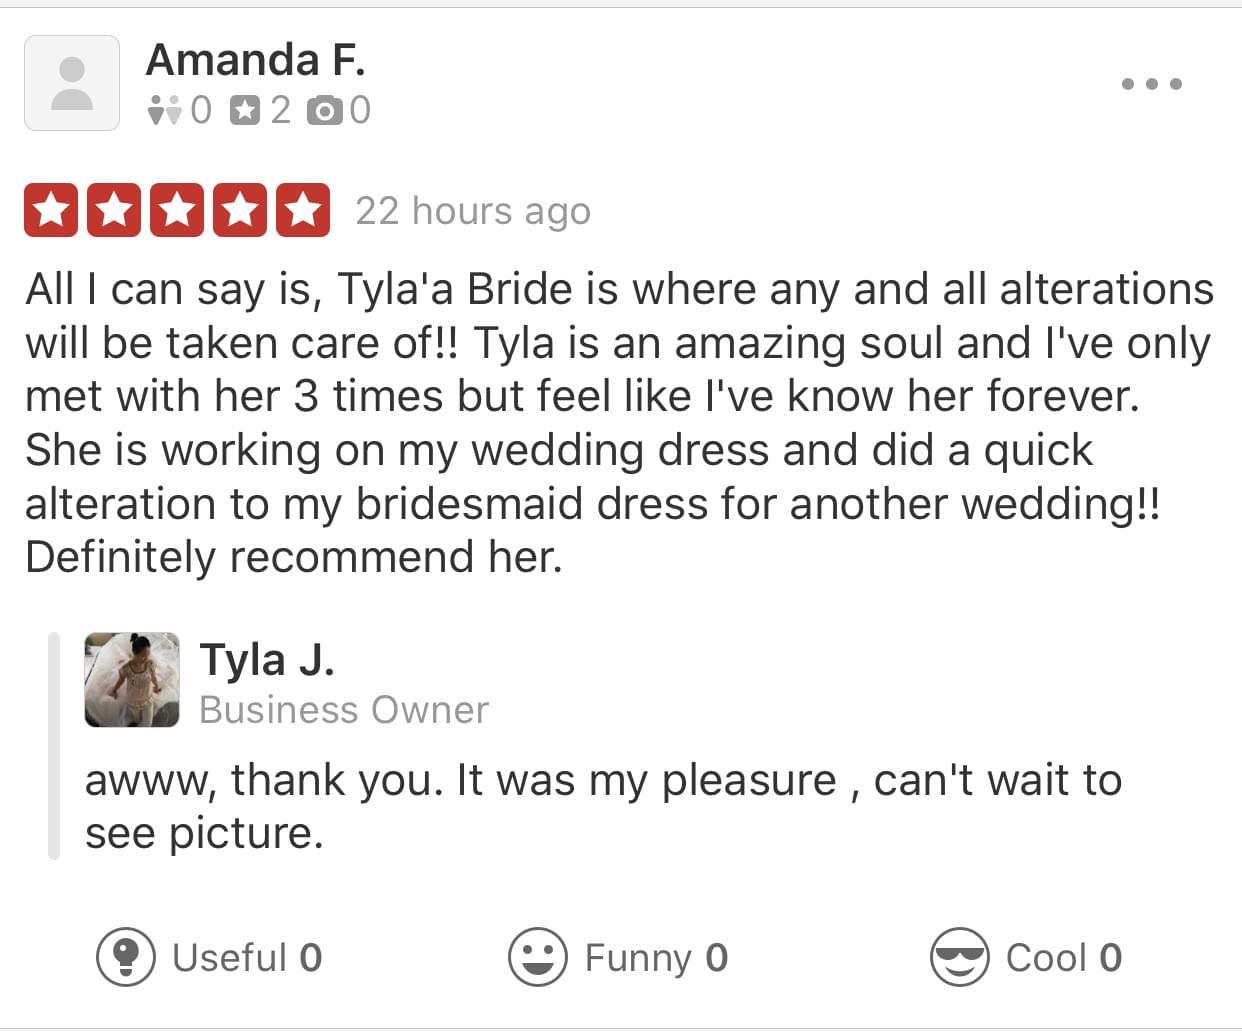 Amanda left a review for tyla's bride and how all her wedding dress alterations were taken care of